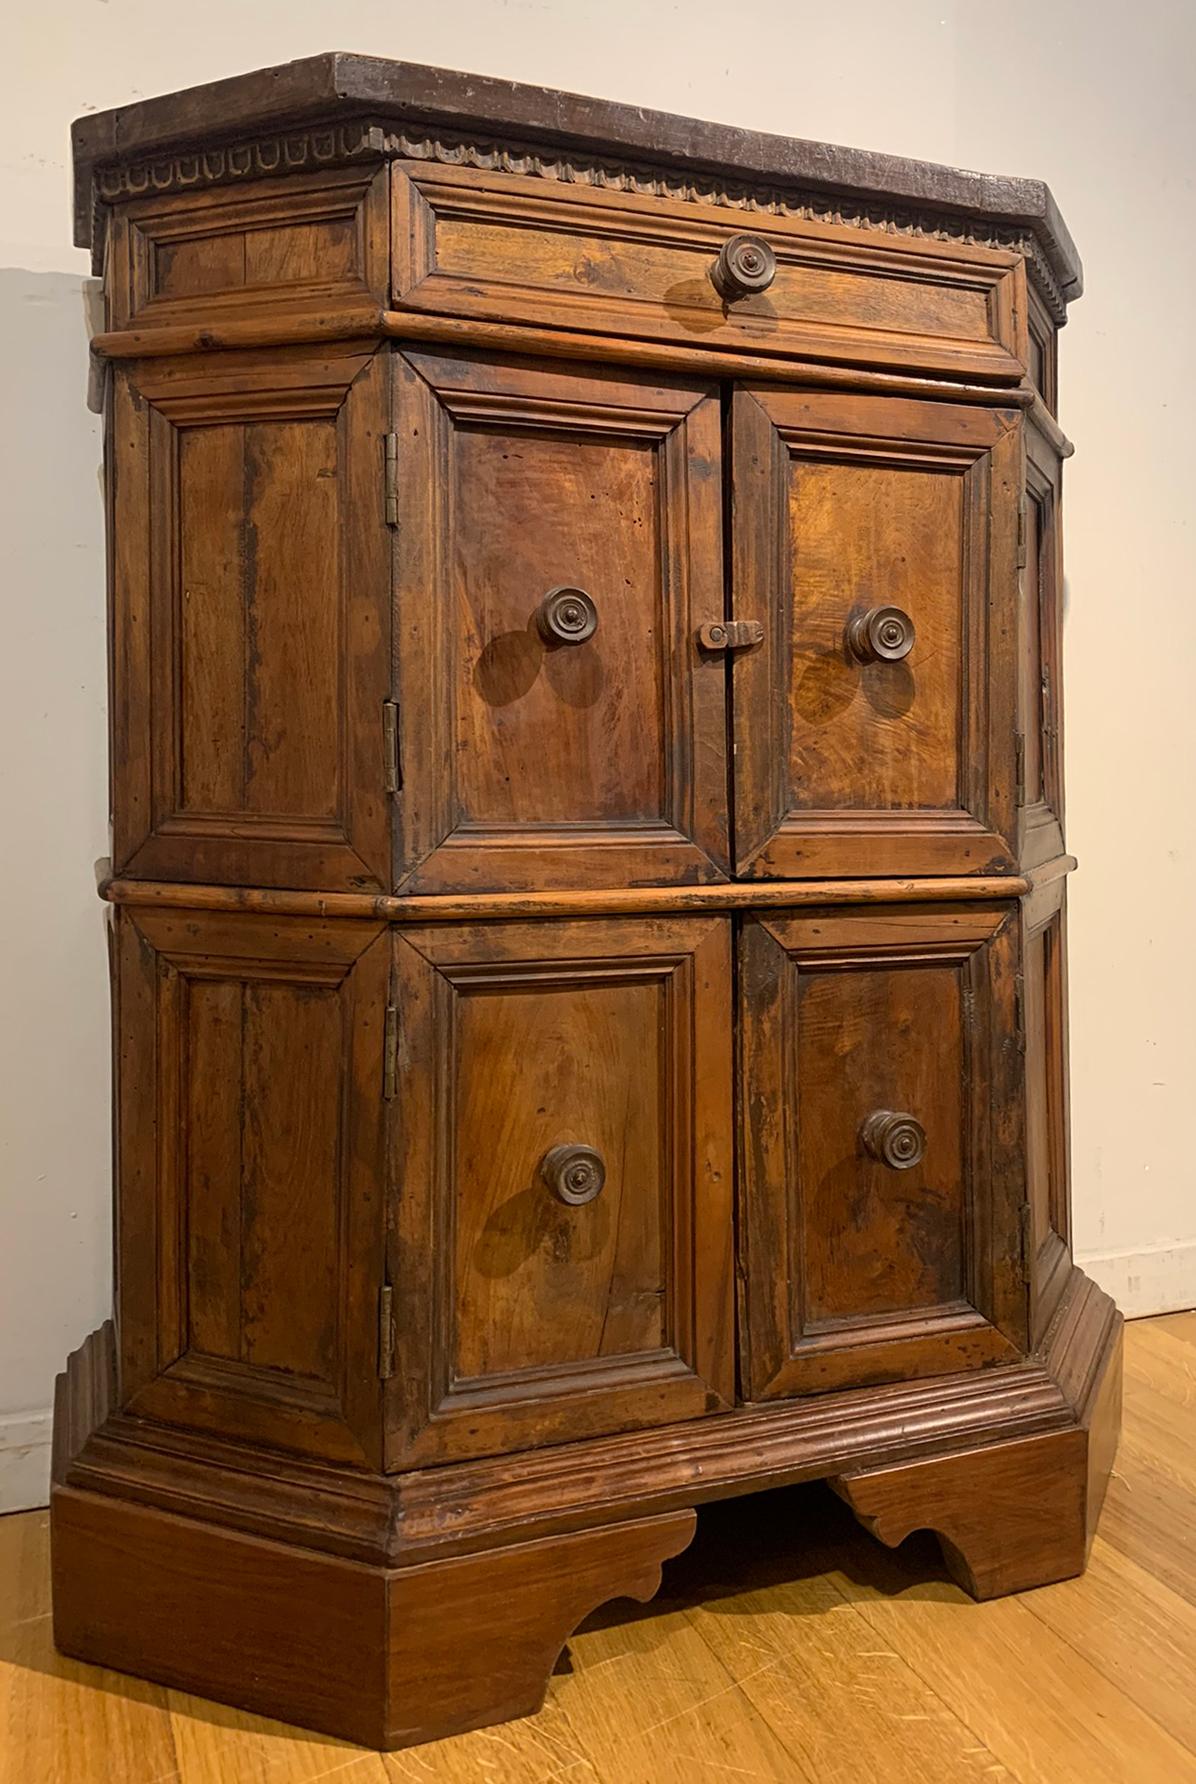 Beautiful small sideboard in walnut with four doors. Undertop with carved frame. Despite the small size, the internal compartments are perfectly optimised.
Typical Tuscan manufacture from the early 17th century.